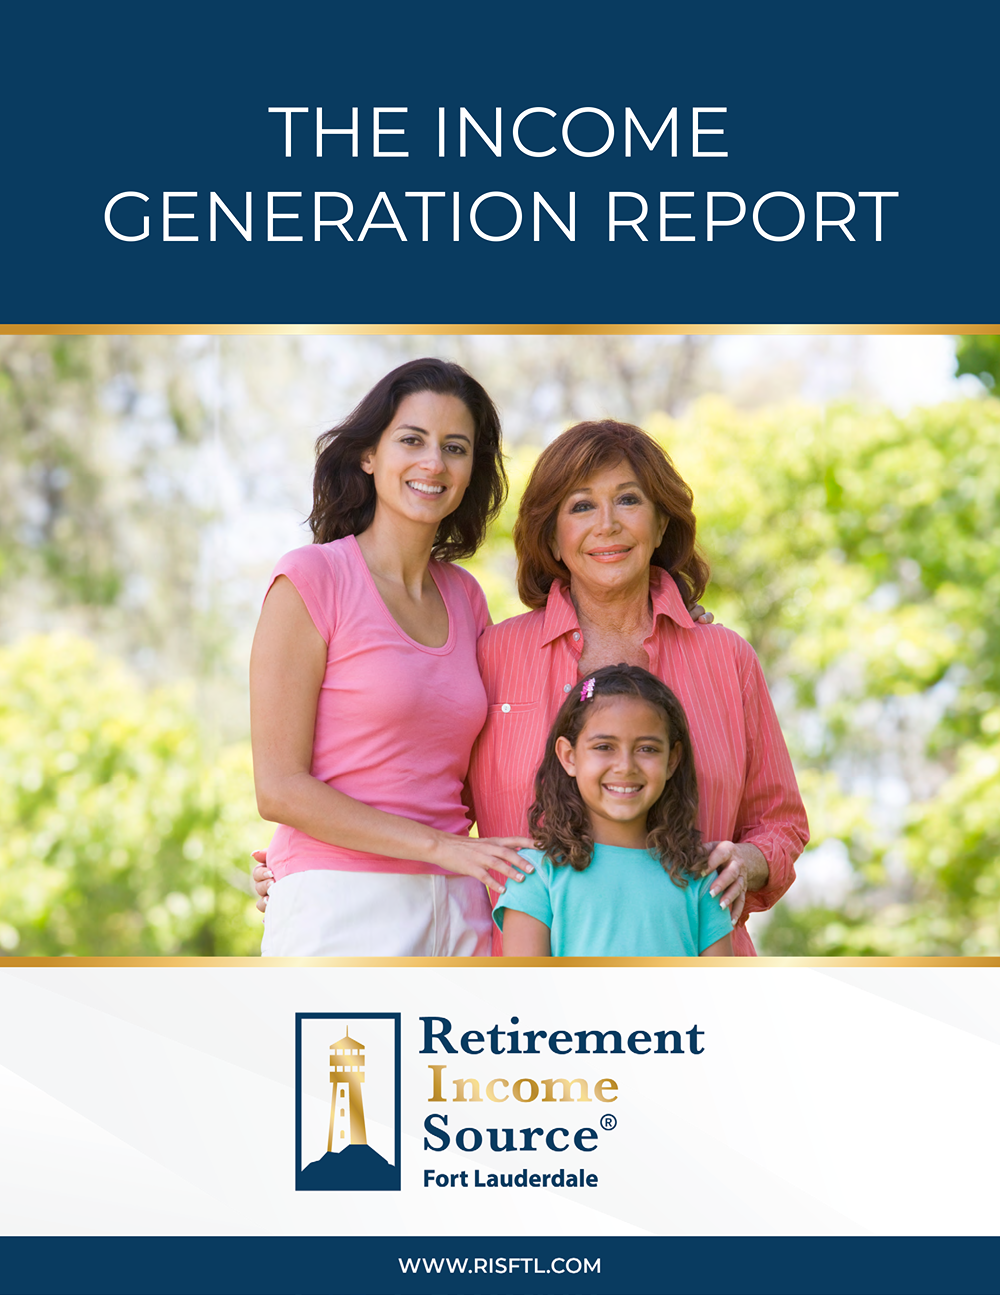 The Income Generation Report